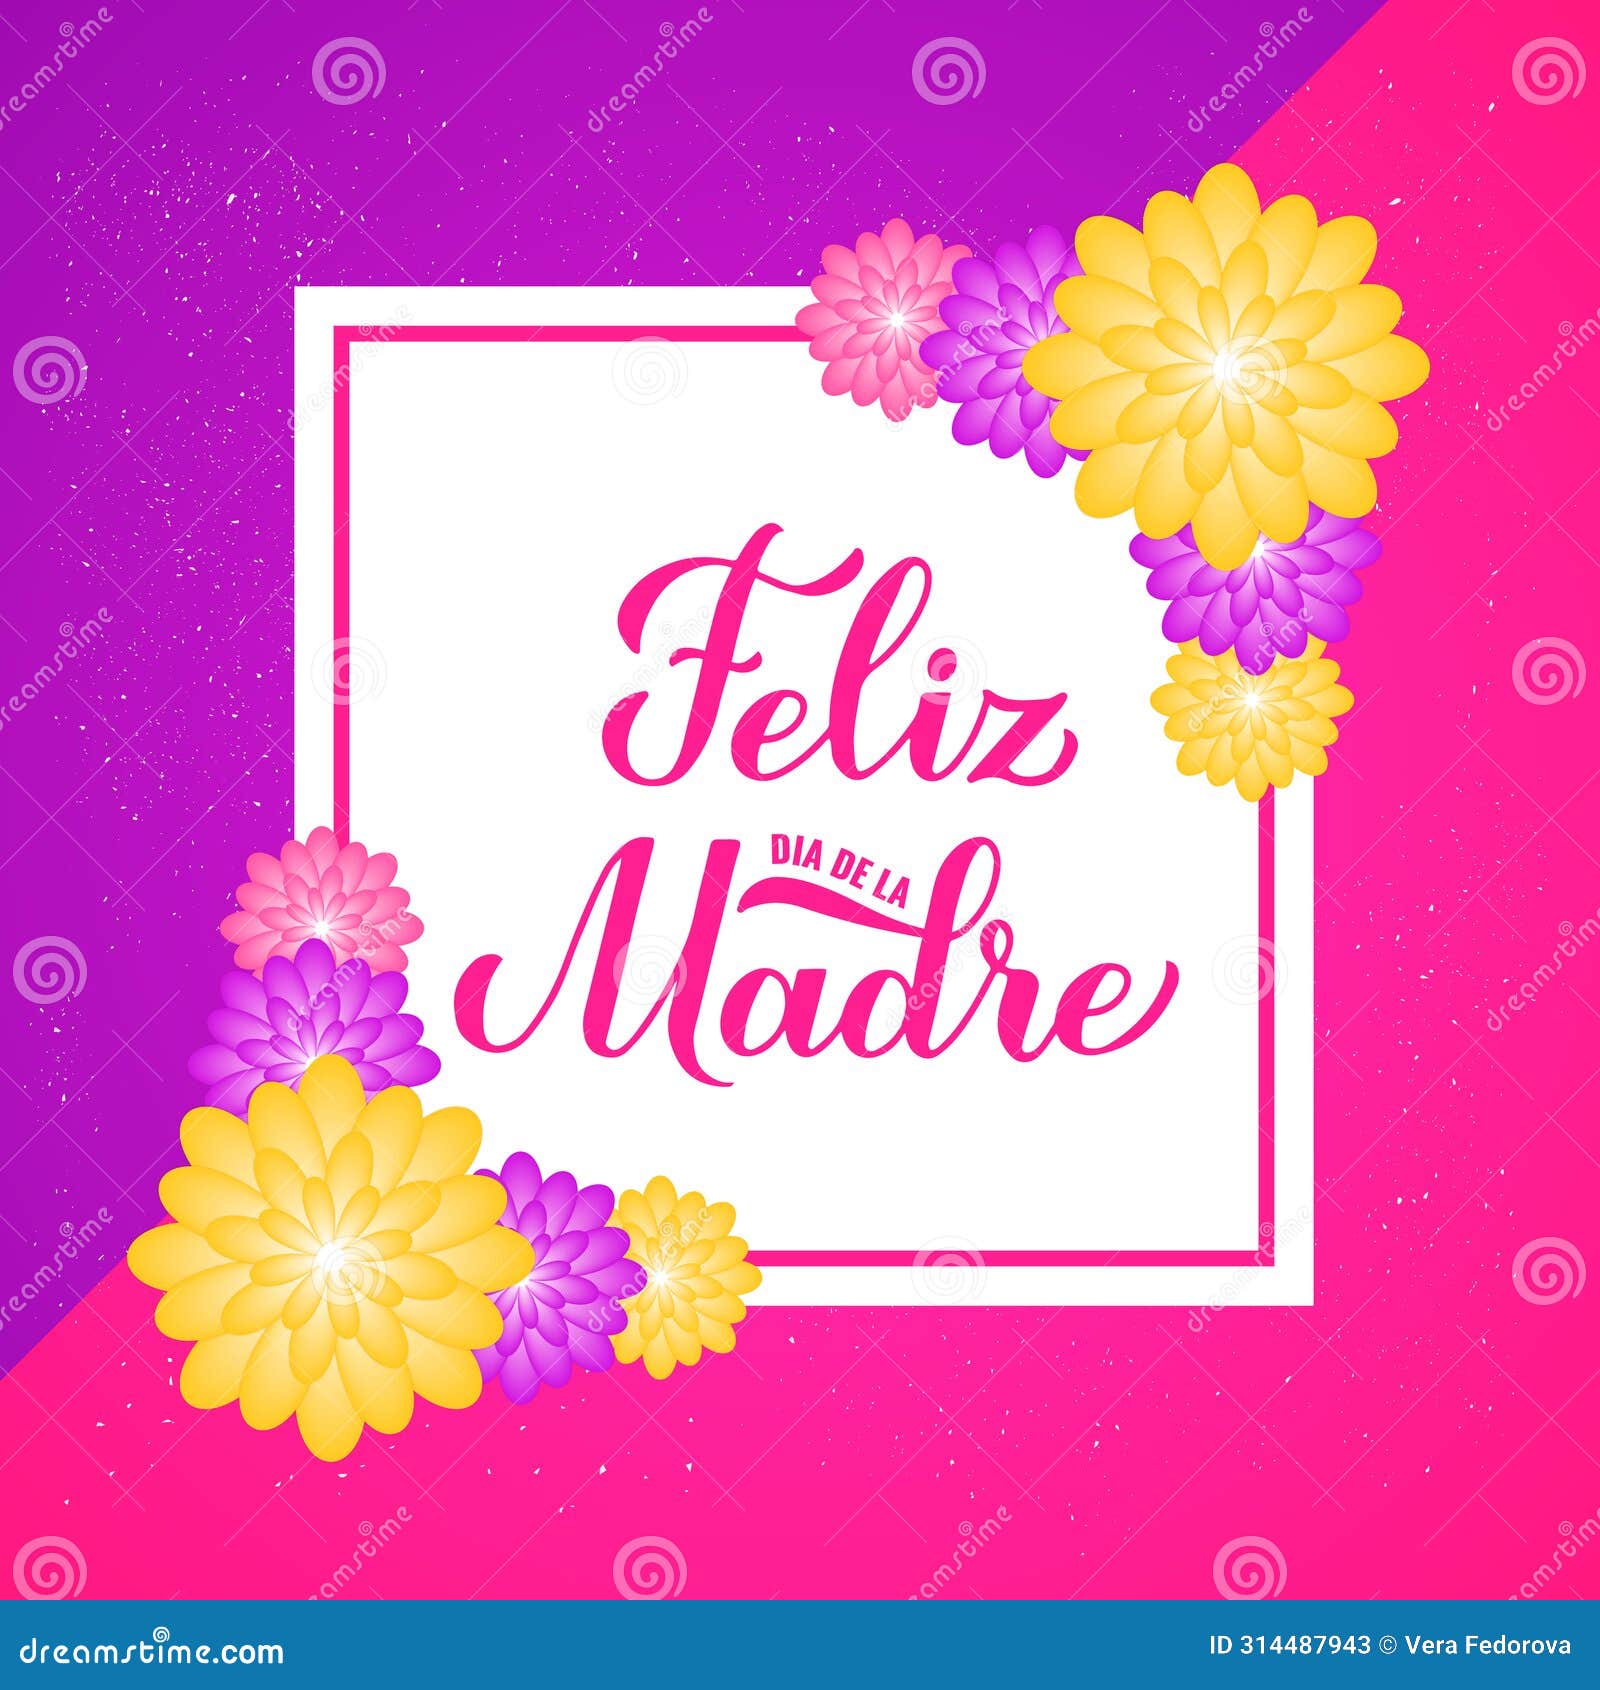 feliz dia de la madre lettring. happy mothers day in spanish. greeting card with spring flowers.  template for